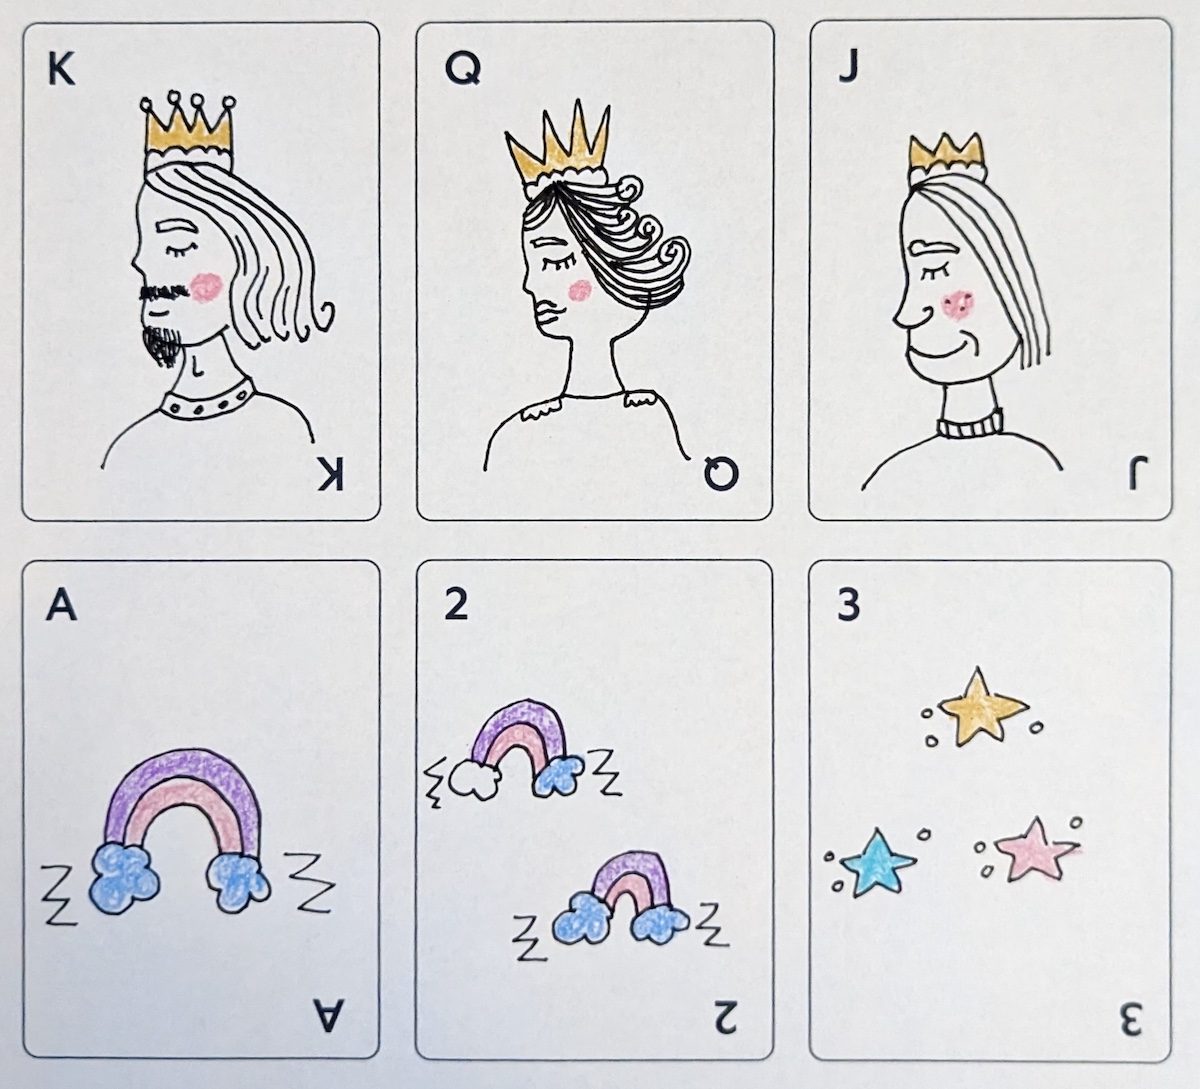 Siobhan's six cards: King dad, Queen mom, Jack uncle, Ace of rainbows, Two of rainbows, and Three of stars